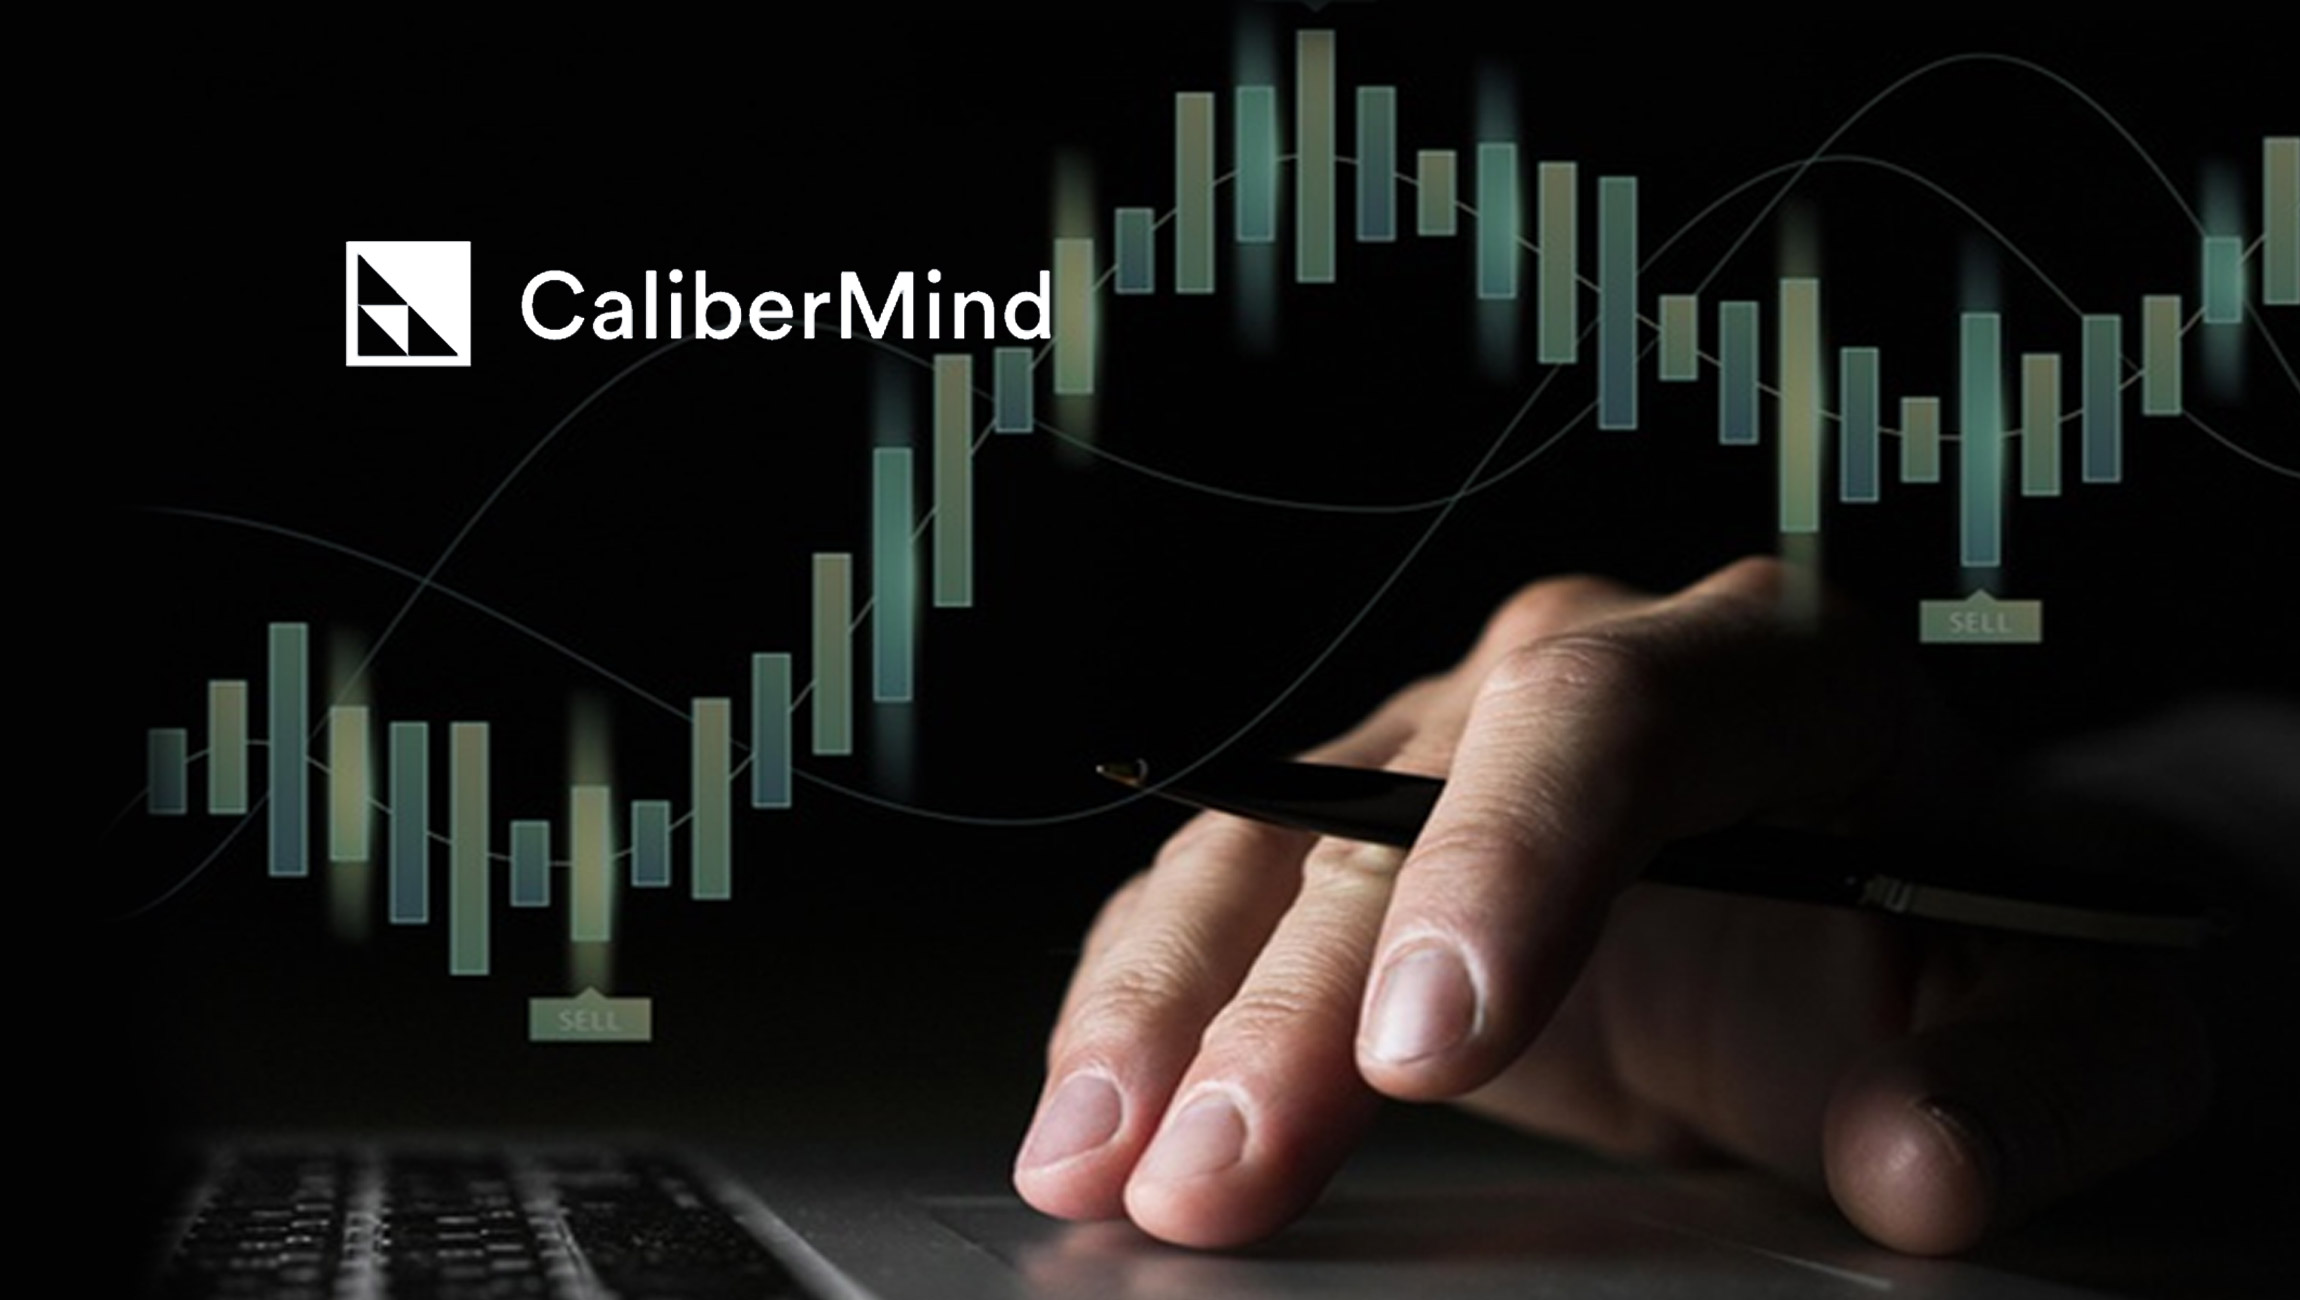 CaliberMind-Gains-Momentum-With-New-Funds-_-Analyst-Recognition